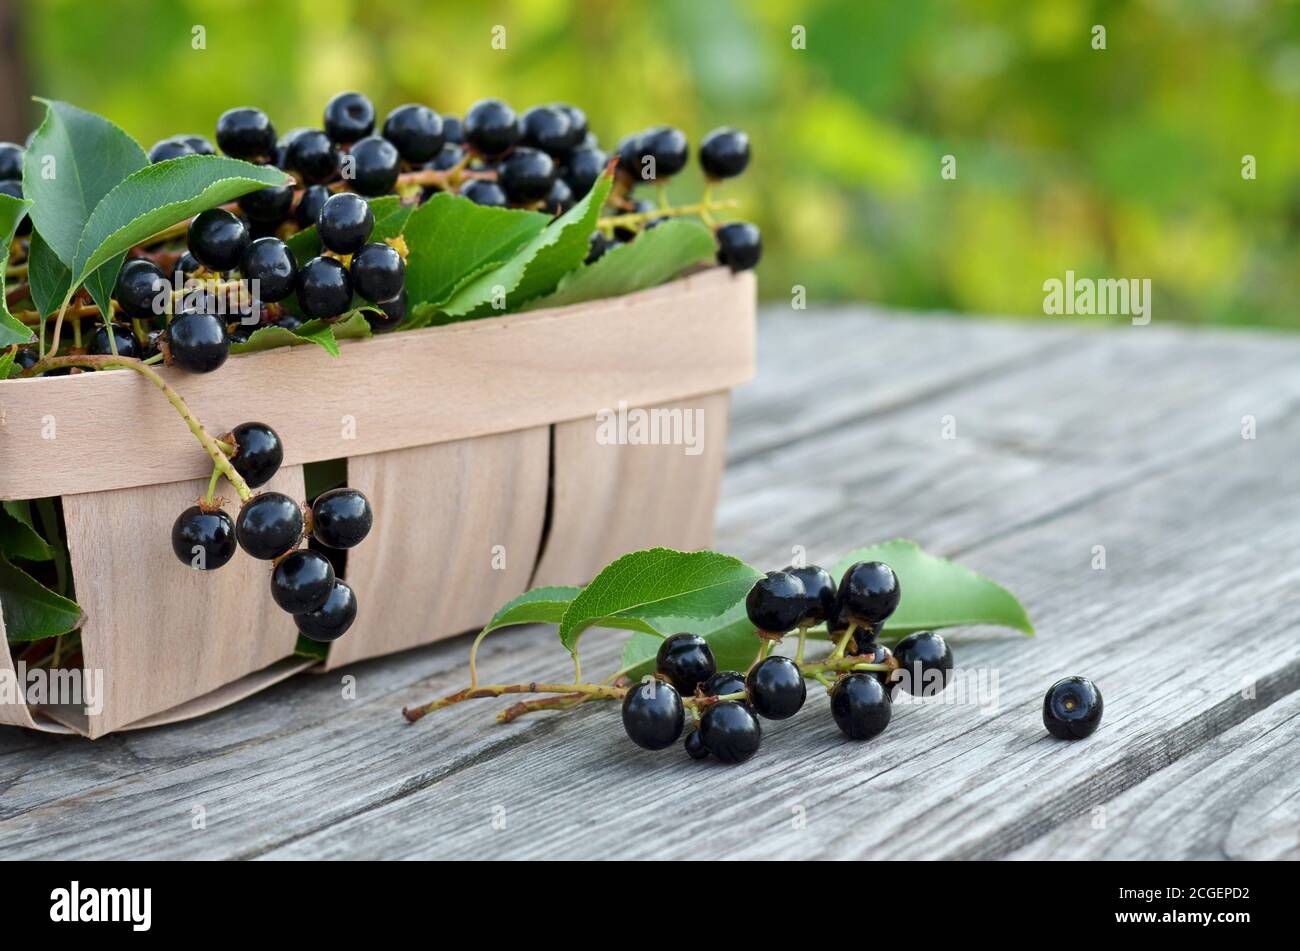 Prunus serotina. Black ripe bird cherry berries in a basket on an old wooden table close-up. Shallow depth of field, selective focus Stock Photo